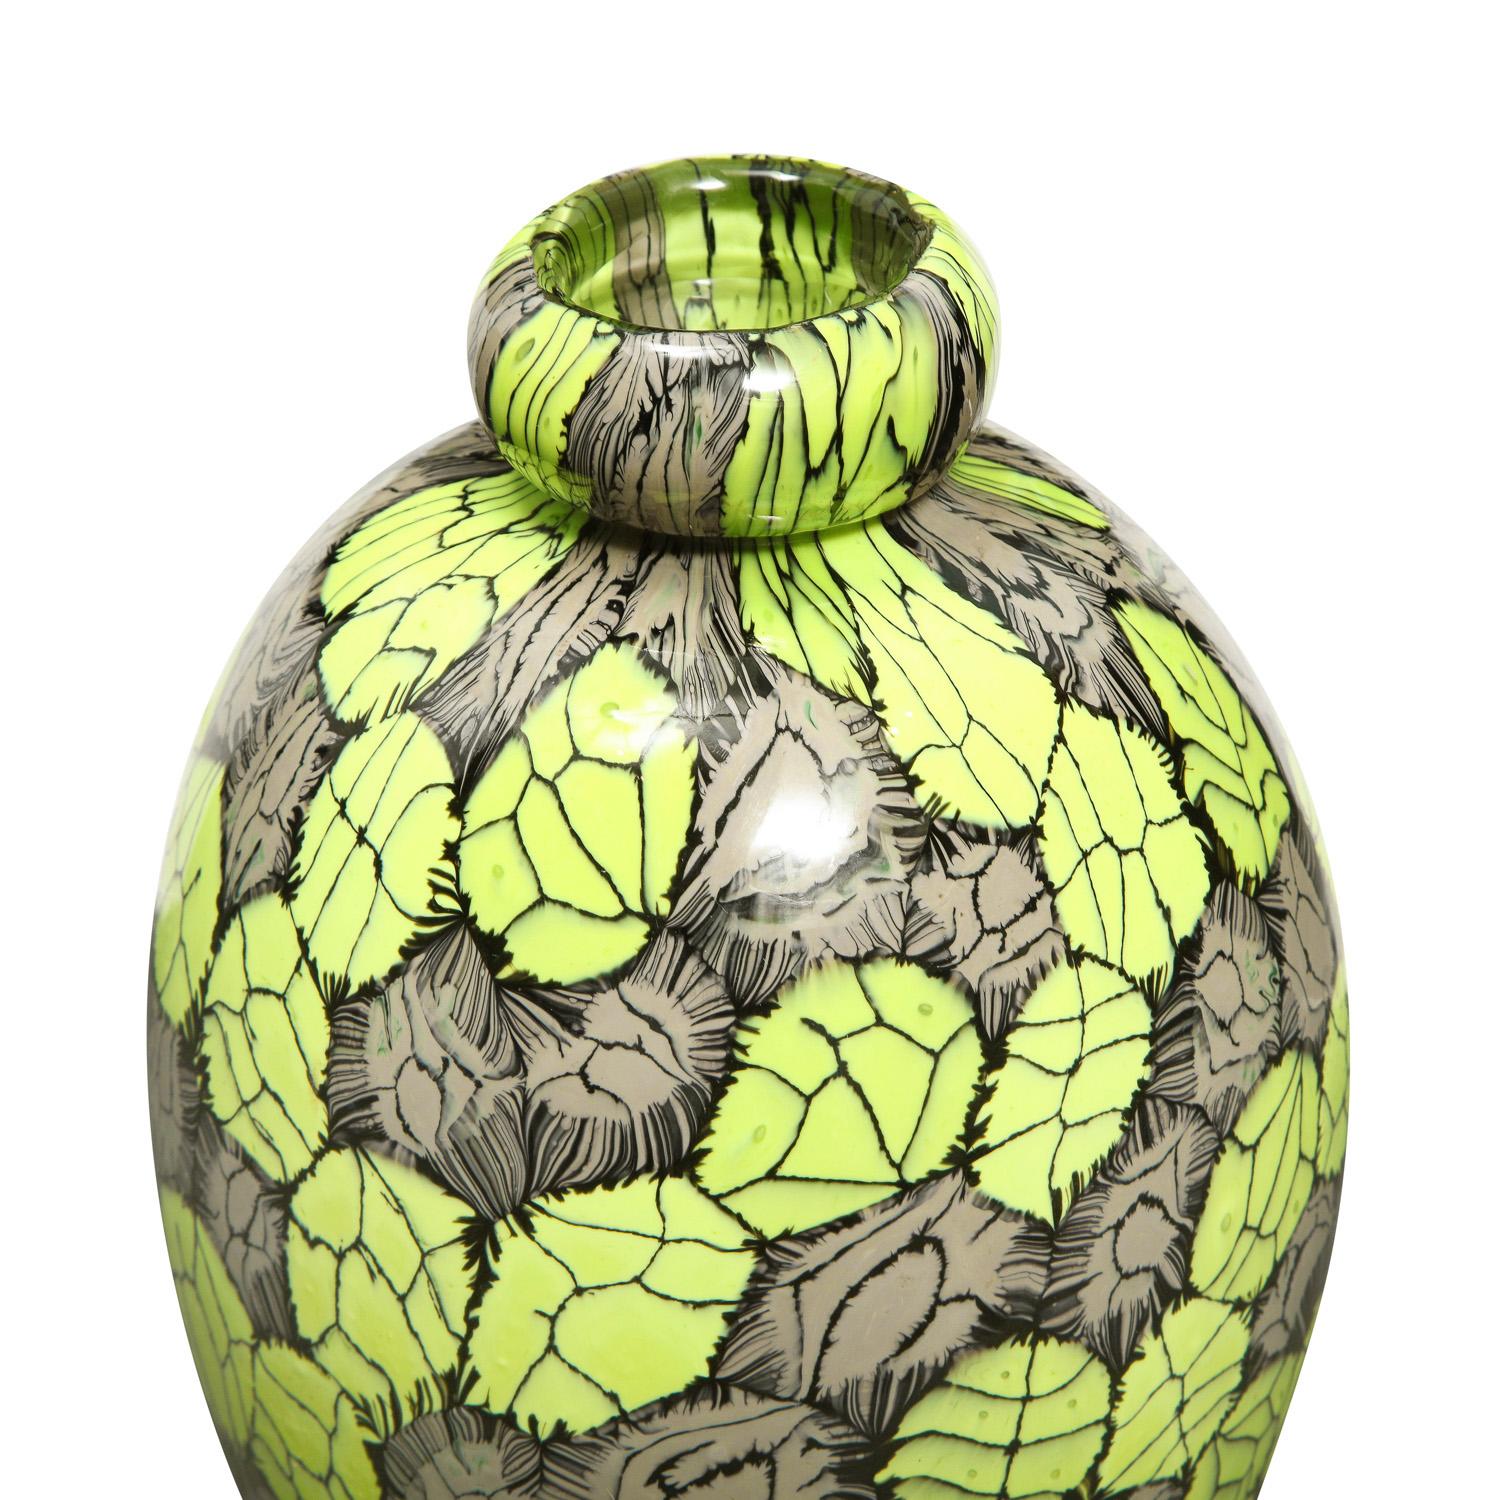 Hand-blown glass vase with unique chartreuse, black and taupe murrine by Vittorio Ferro, Murano Italy, 1999 (signed on the bottom “VITTORIO FERRO ‘99”). Born in 1932, Vittorio Ferro was a first rate glass master who spent many years working at